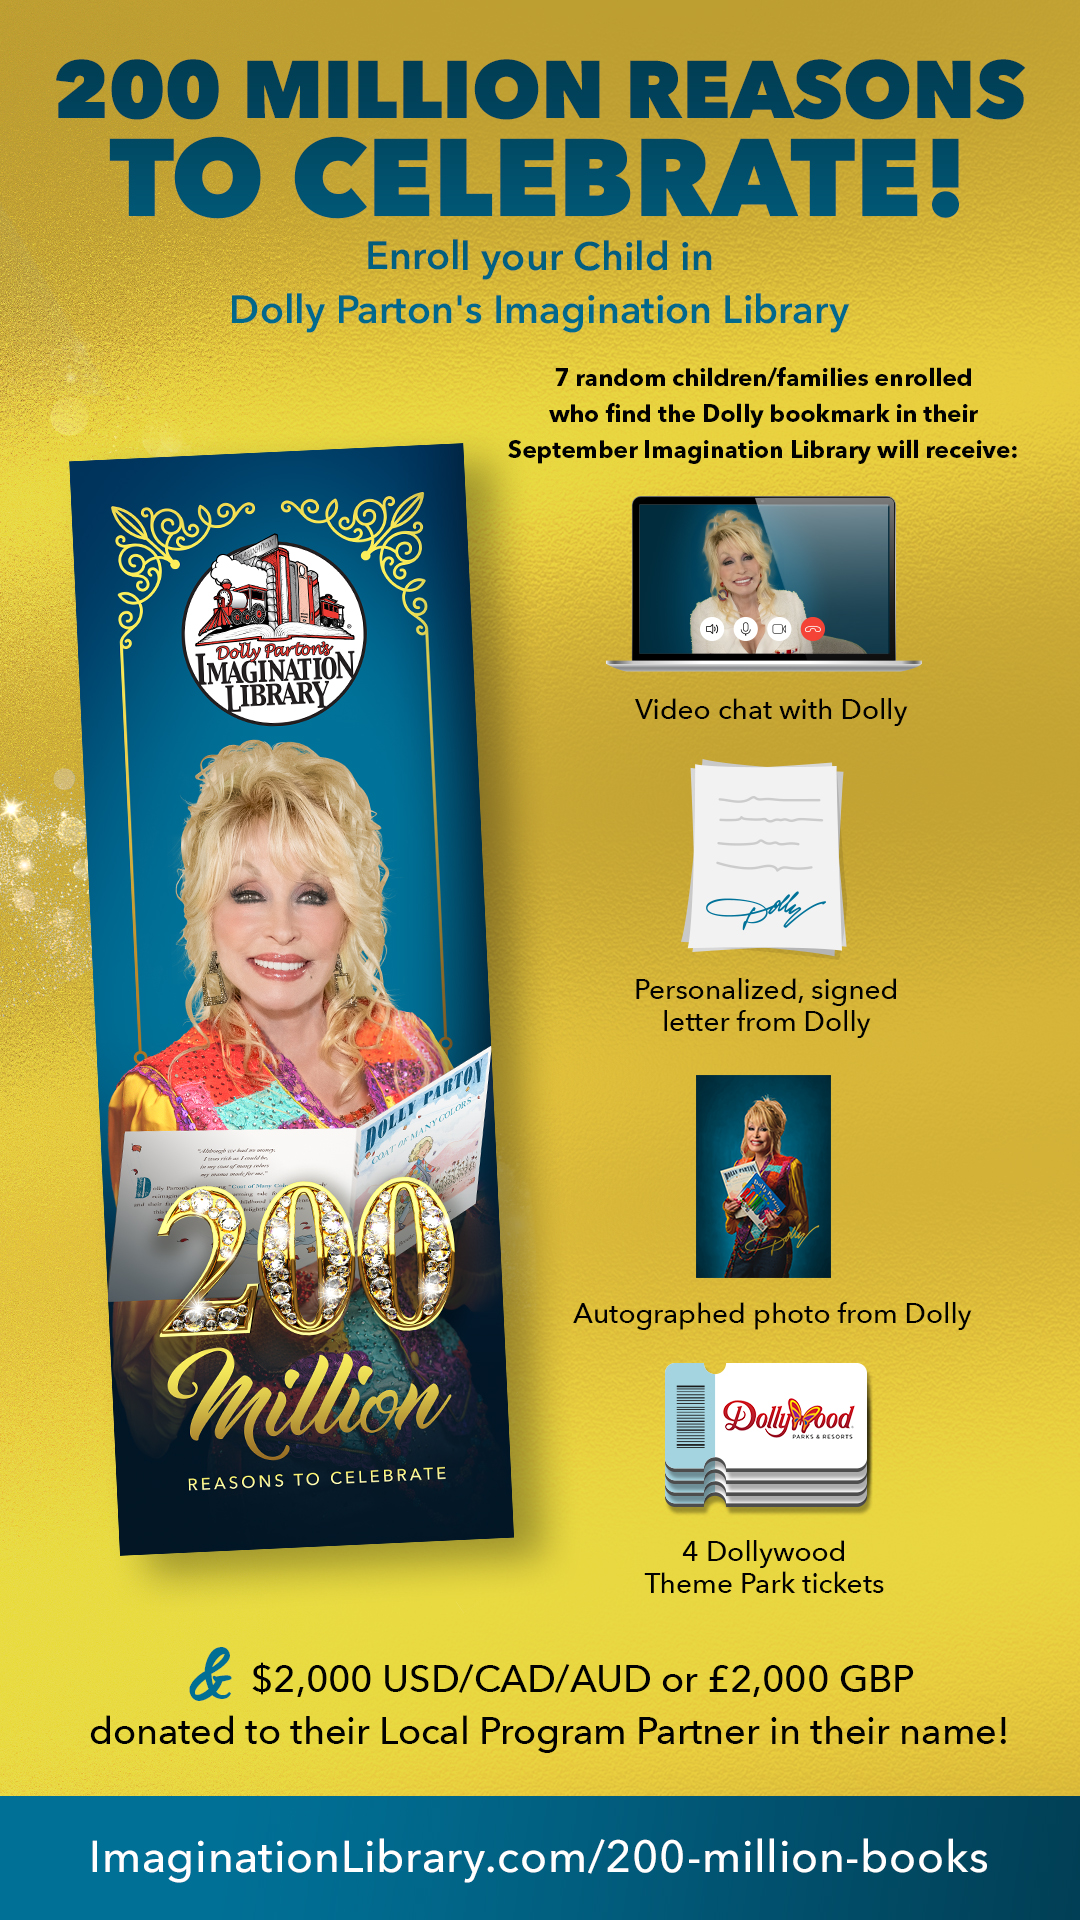 DOLLY PARTON’S IMAGINATION LIBRARY IS CELEBRATING GIFTING 200-MILLION BOOKS SINCE 1995